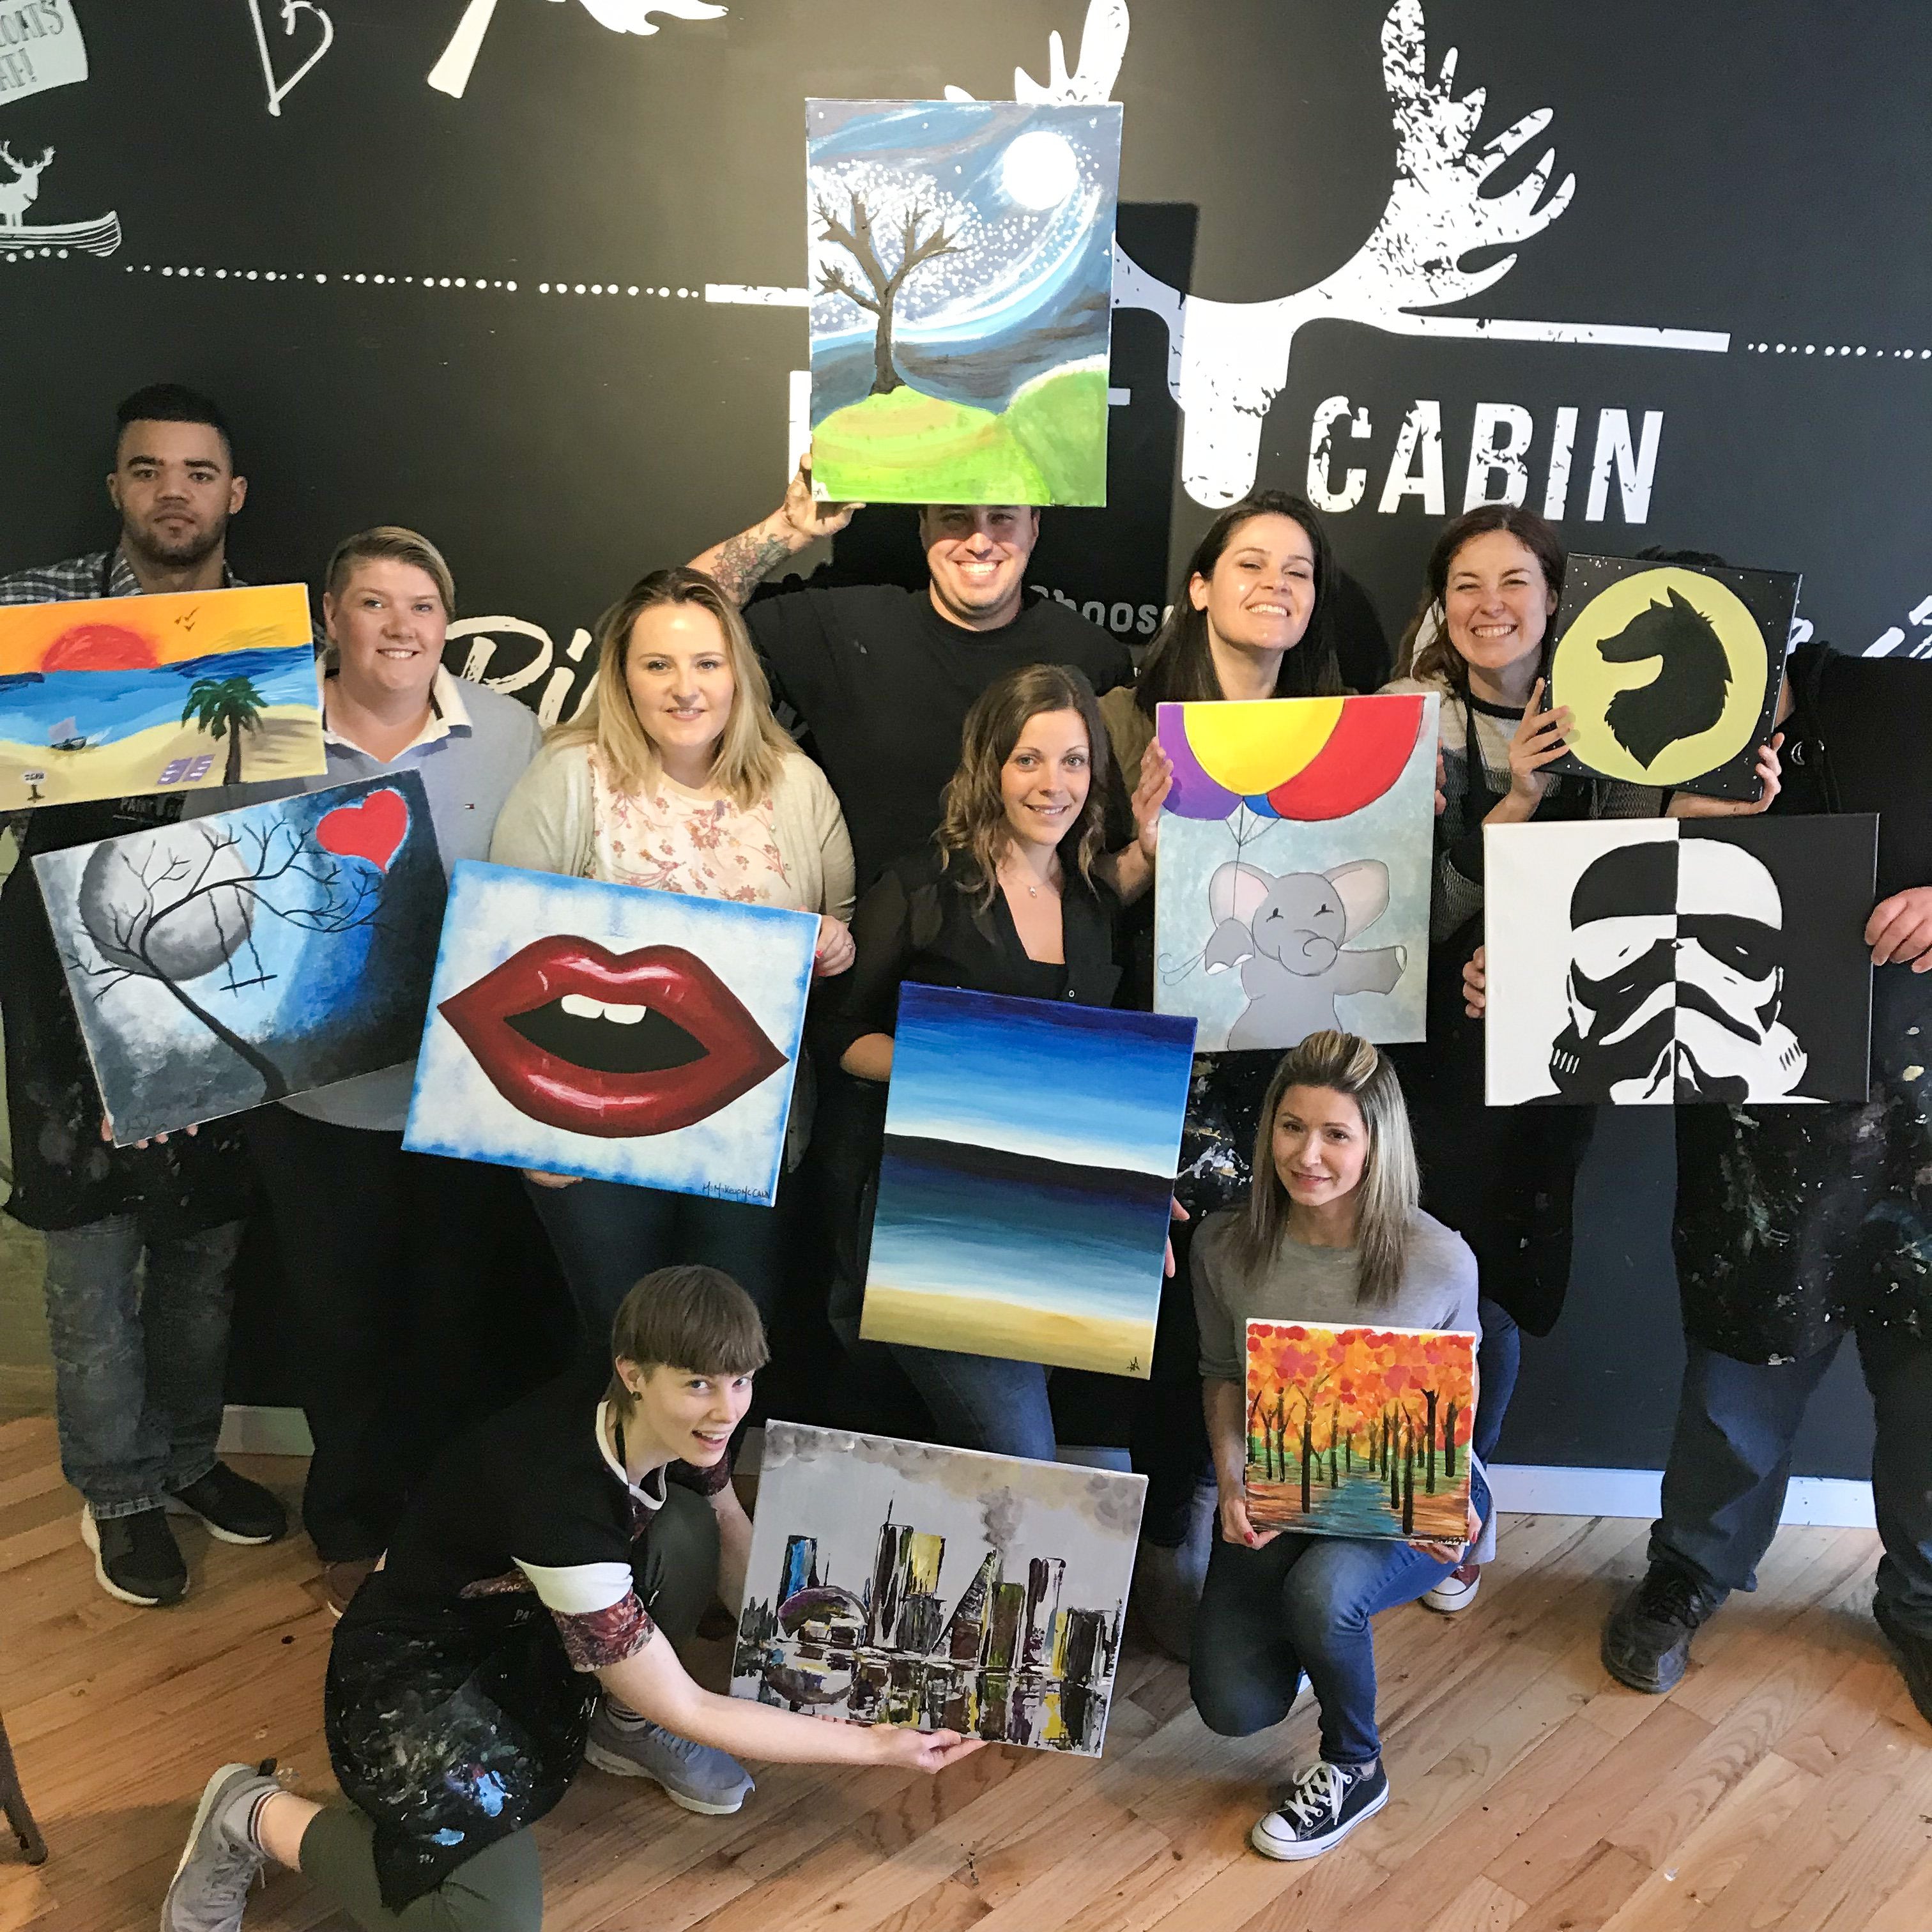 fun activities and drinks - paint parties and DIY adventures